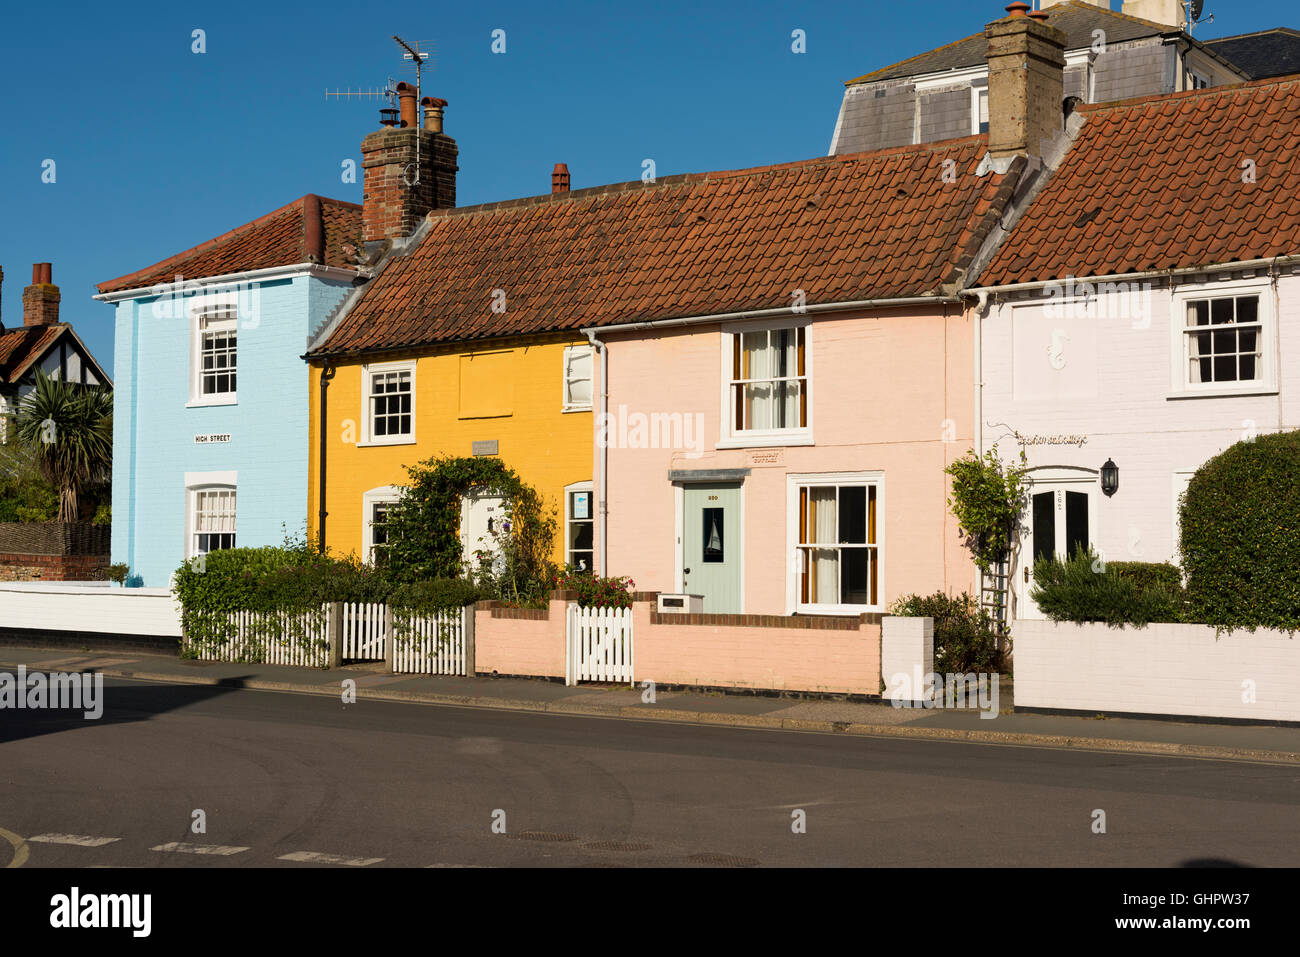 Colourful Painted Terraced Cottages And Houses In Aldeburgh